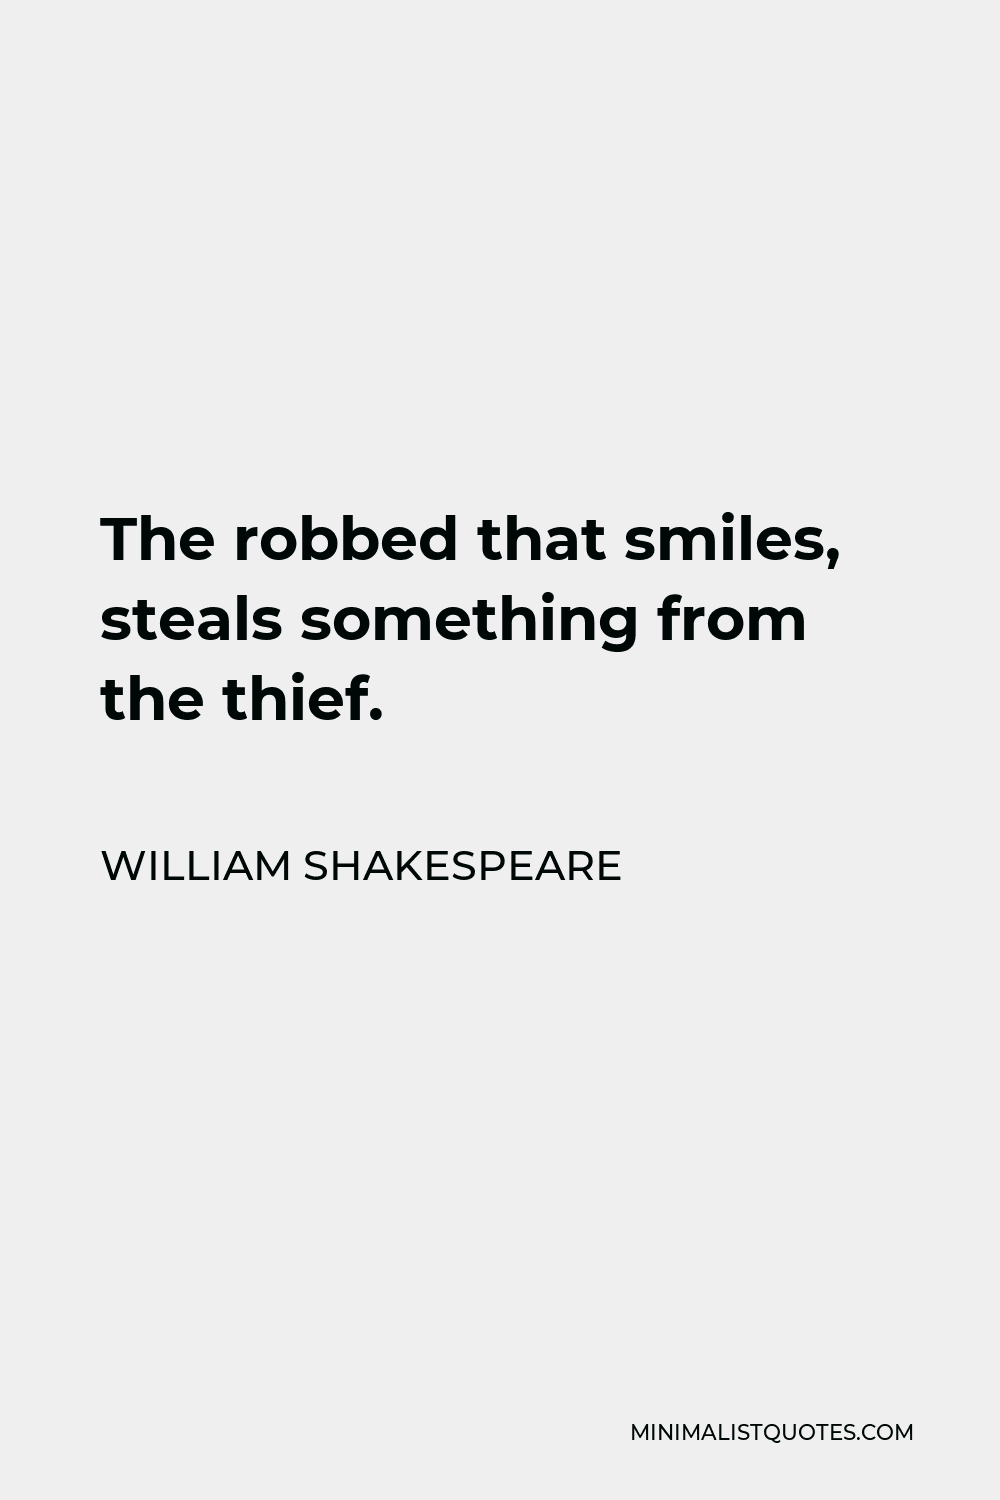 William Shakespeare Quote - The robbed that smiles, steals something from the thief.